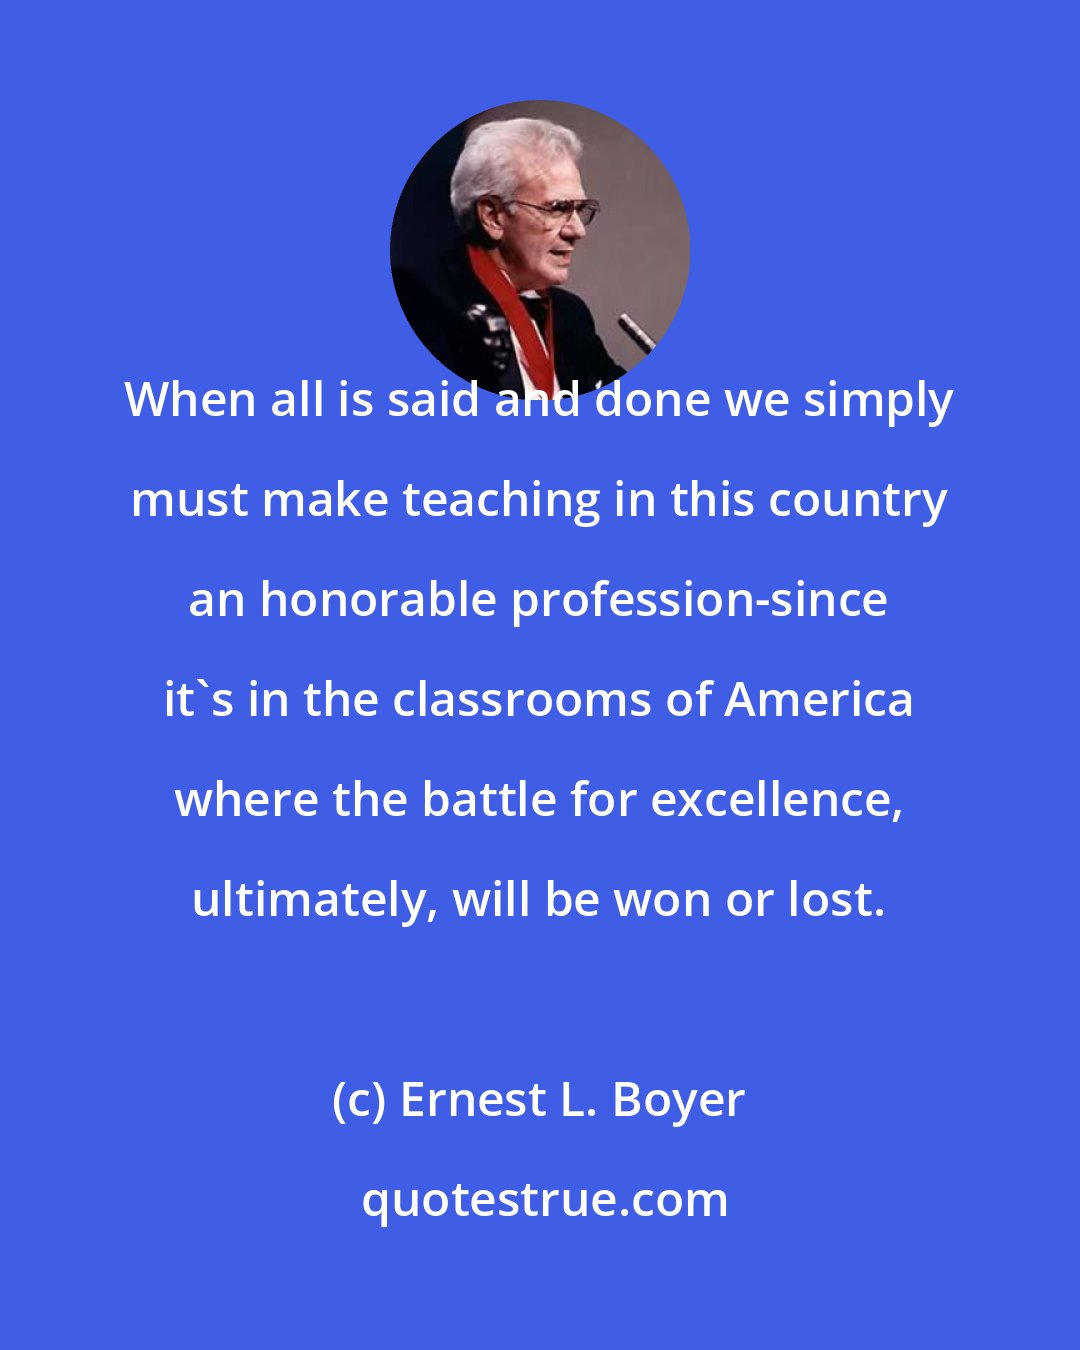 Ernest L. Boyer: When all is said and done we simply must make teaching in this country an honorable profession-since it's in the classrooms of America where the battle for excellence, ultimately, will be won or lost.